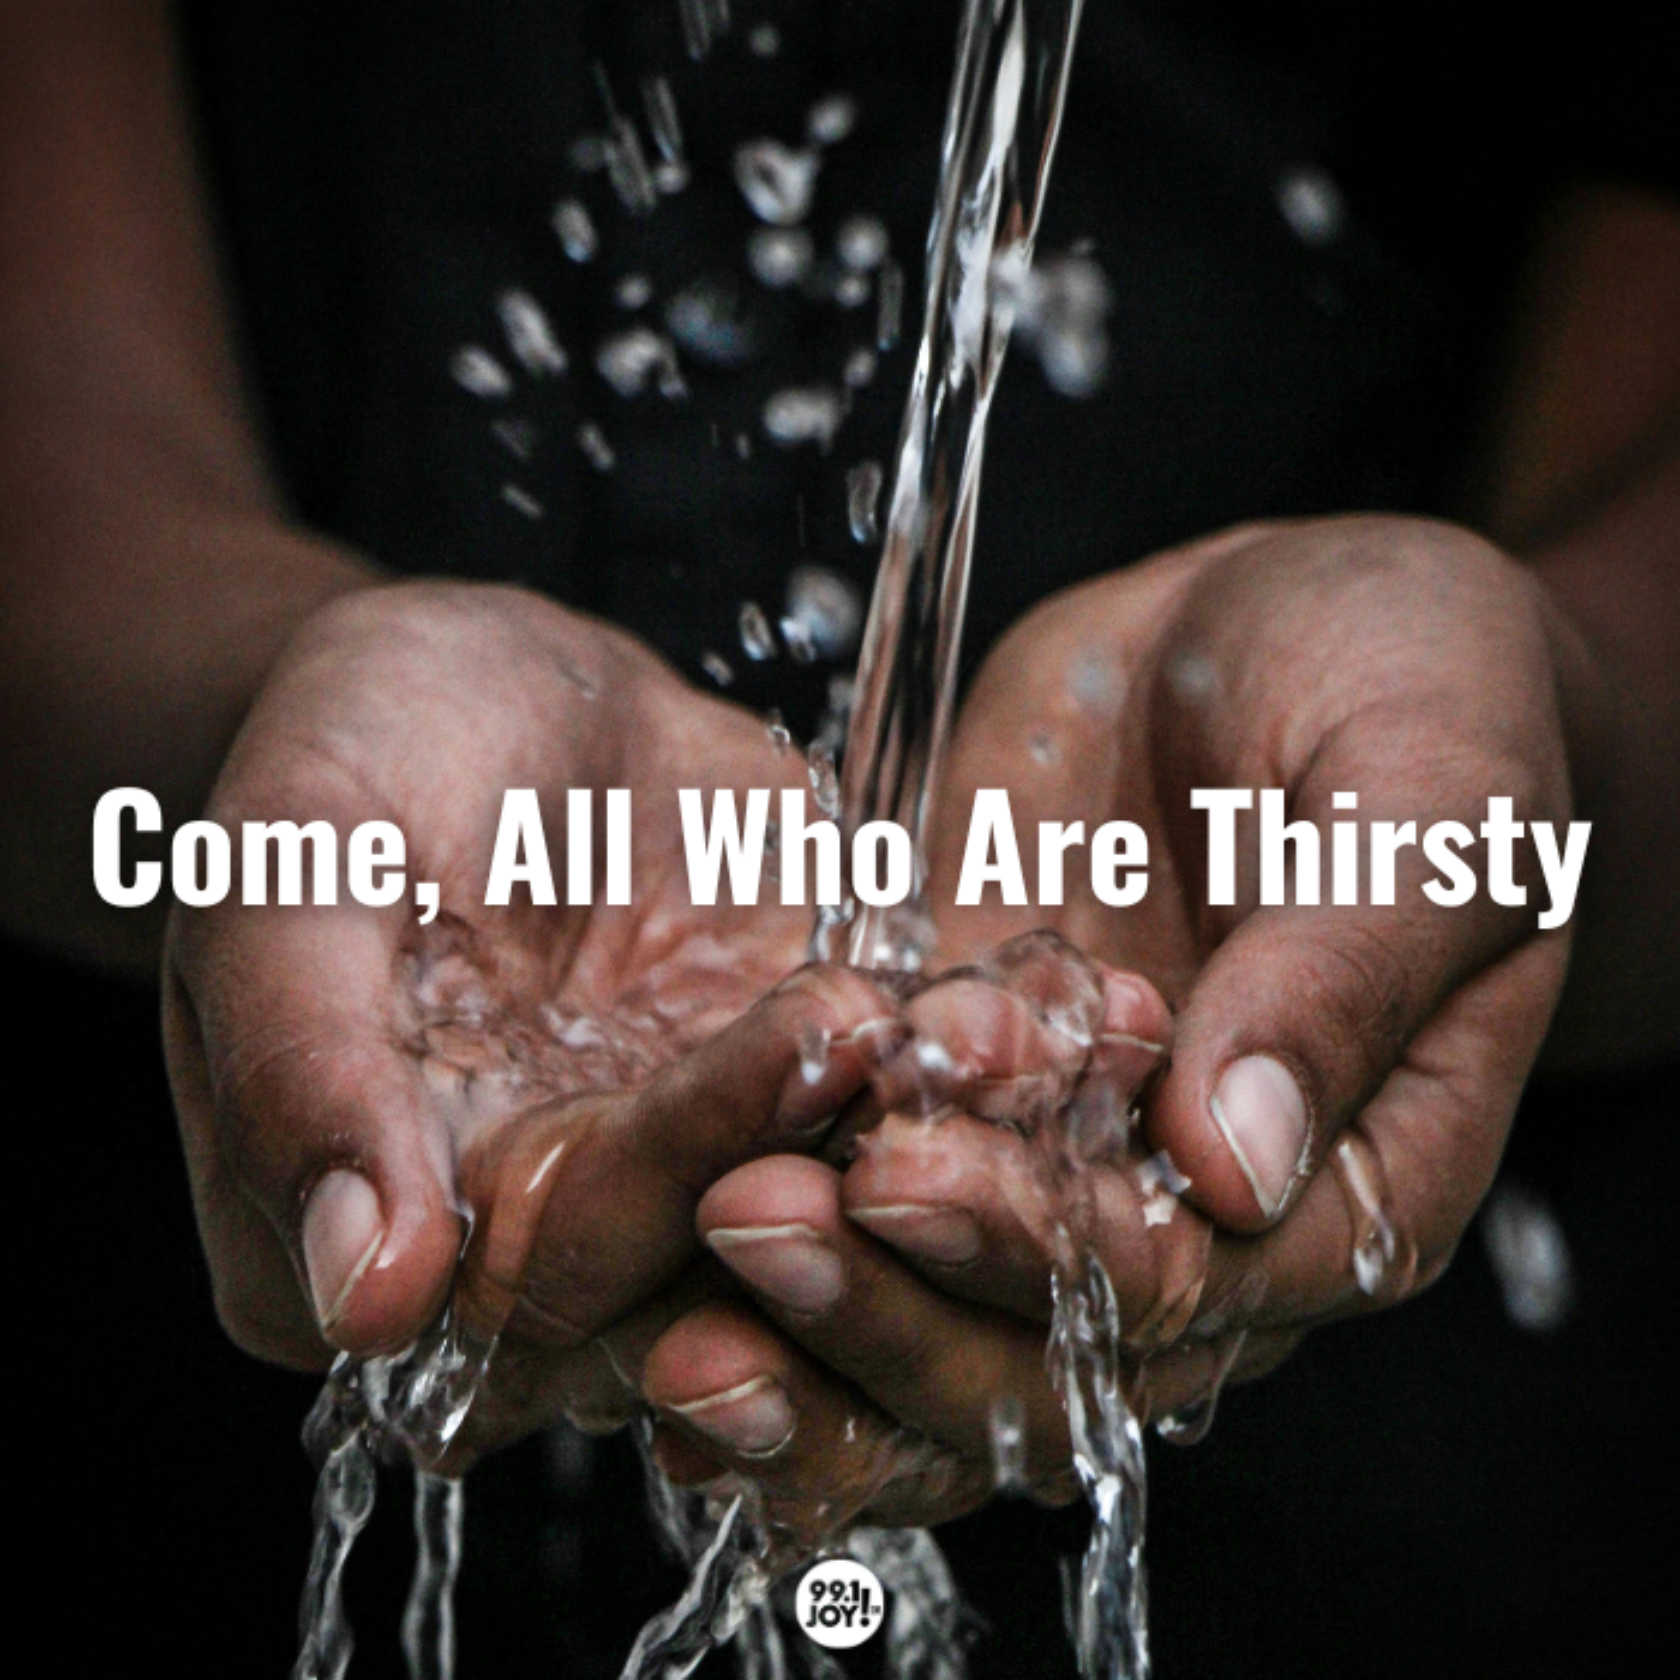 Come, All Who Are Thirsty